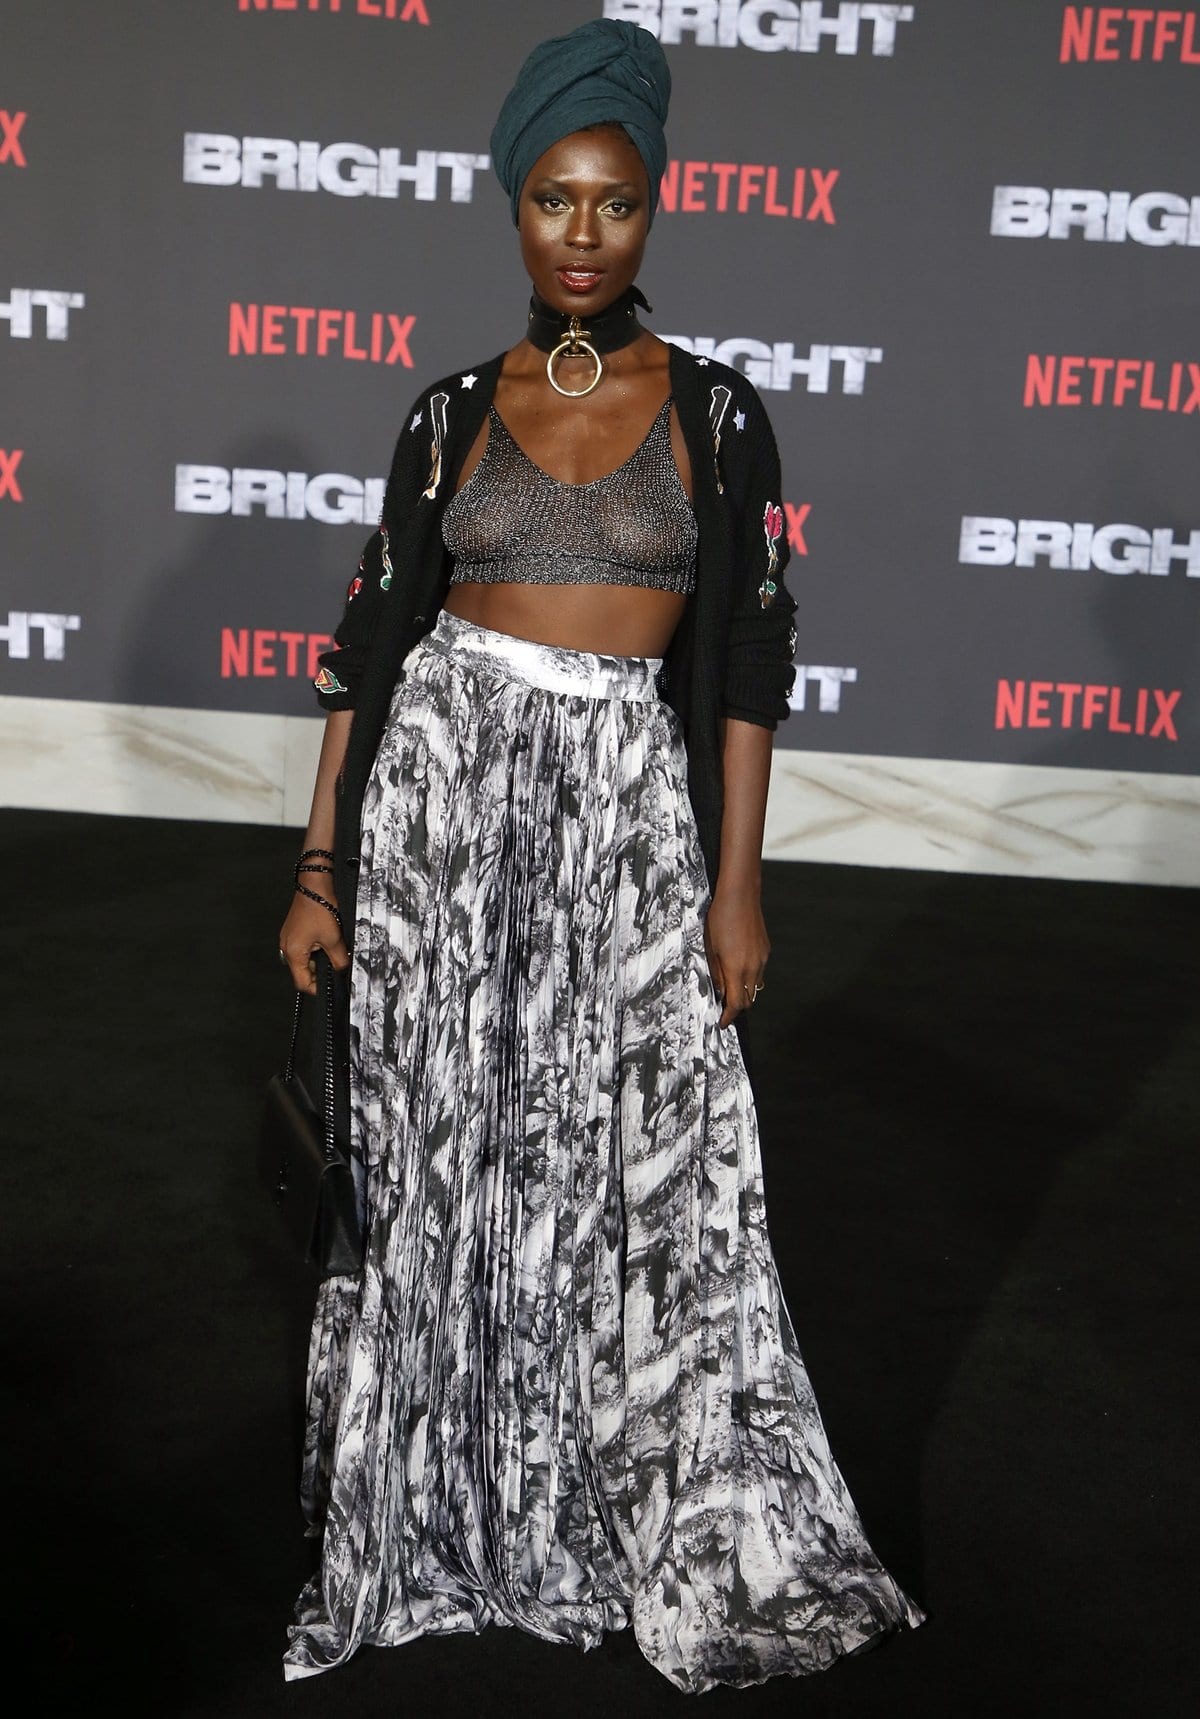 Jodie Turner-Smith attends the Premiere Of Netflix's "Bright"